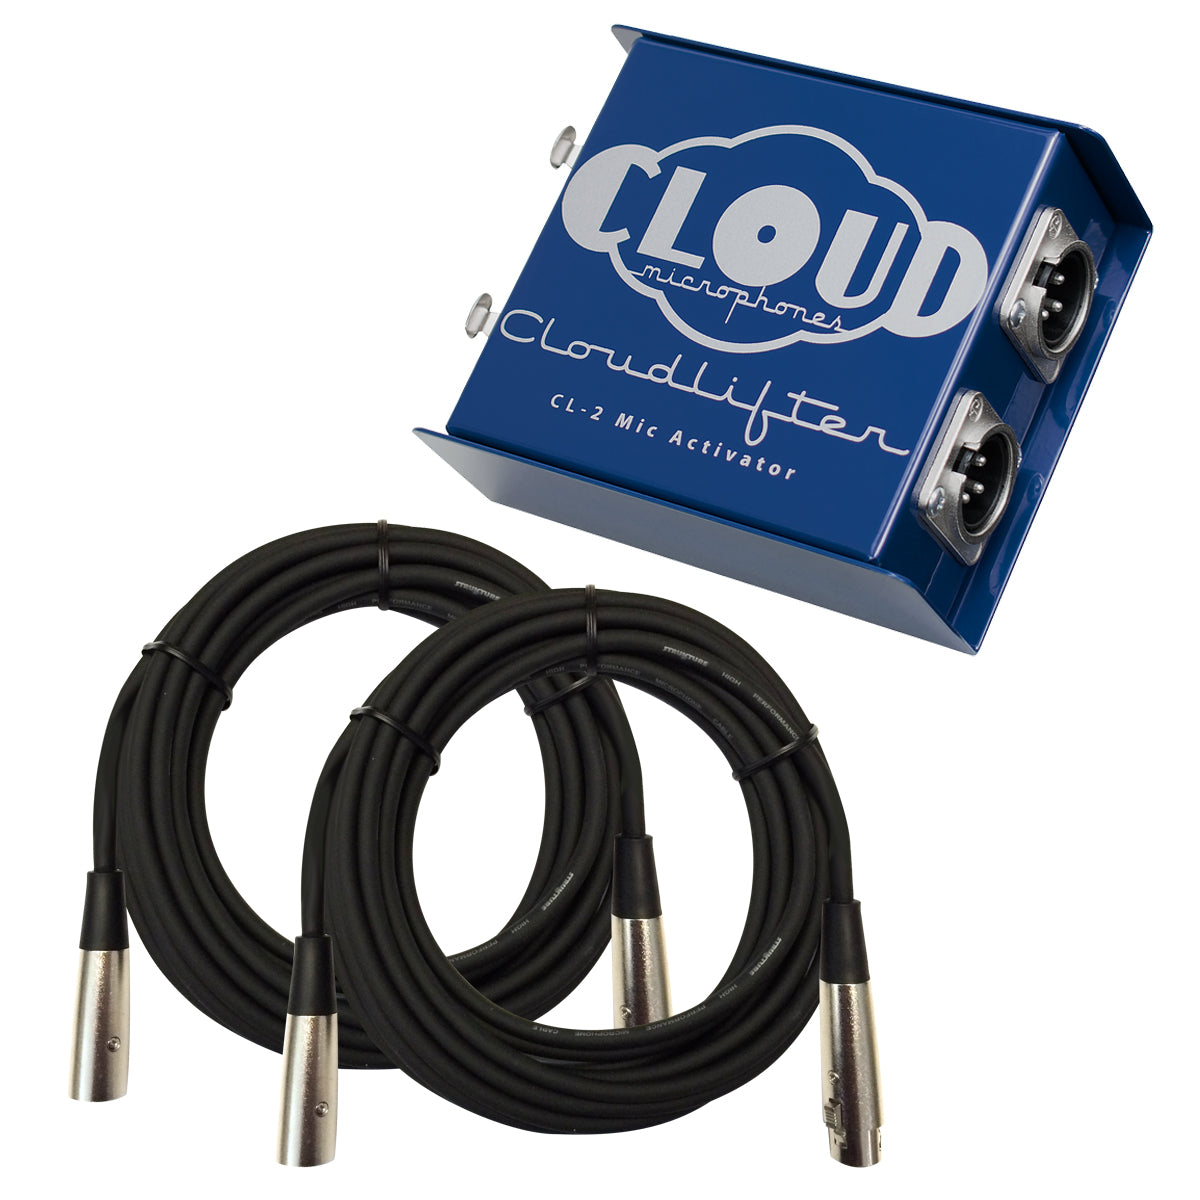 Cloud Microphones Cloudlifter CL-2 Mic Activator CABLE KIT